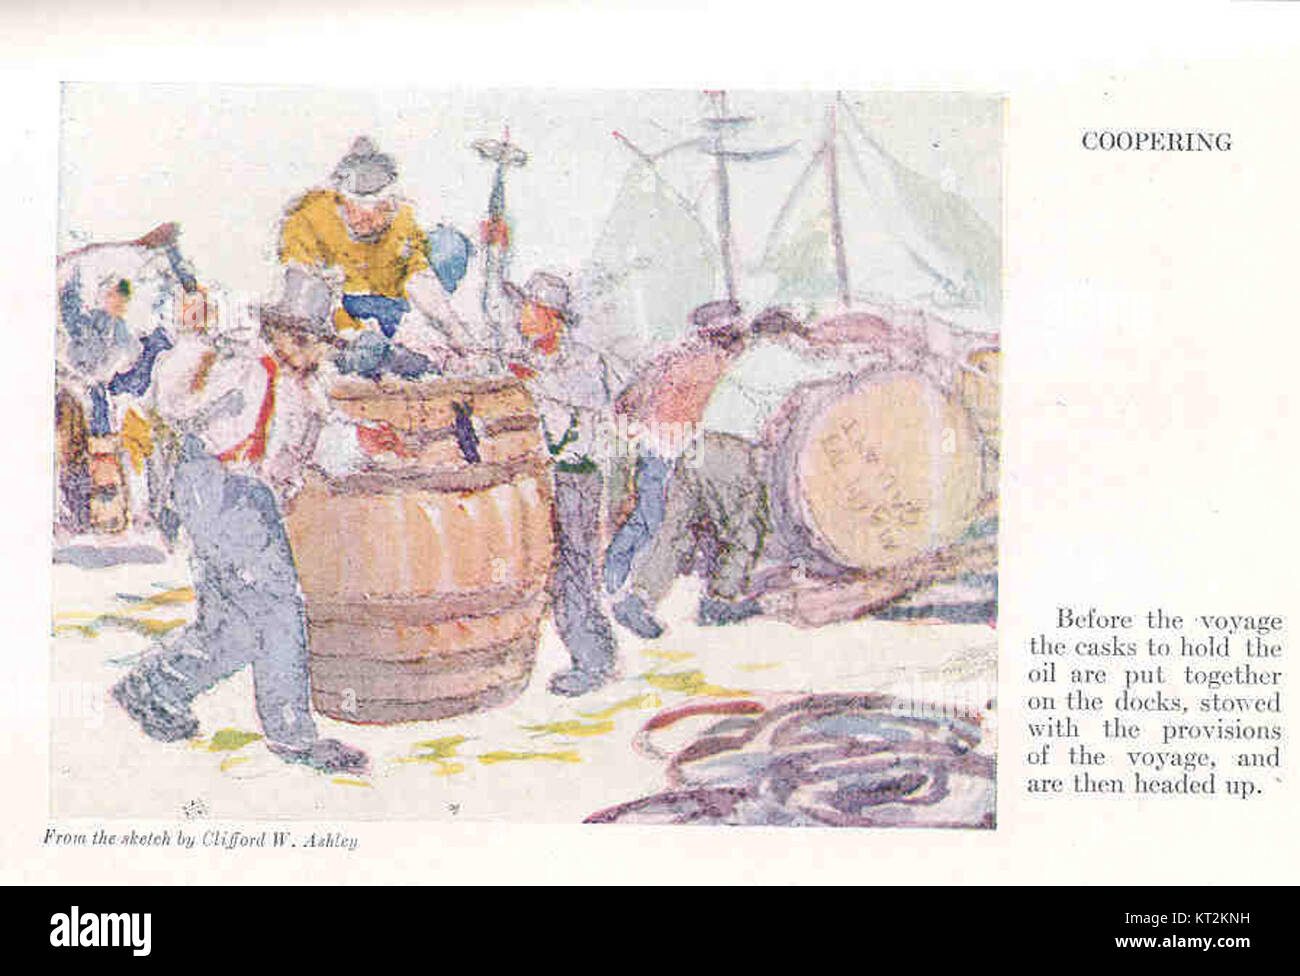 36328 Coopering - Before the voyage the casks to hold the oil are put together on the docks, stowed with the provisions of the voyage Stock Photo